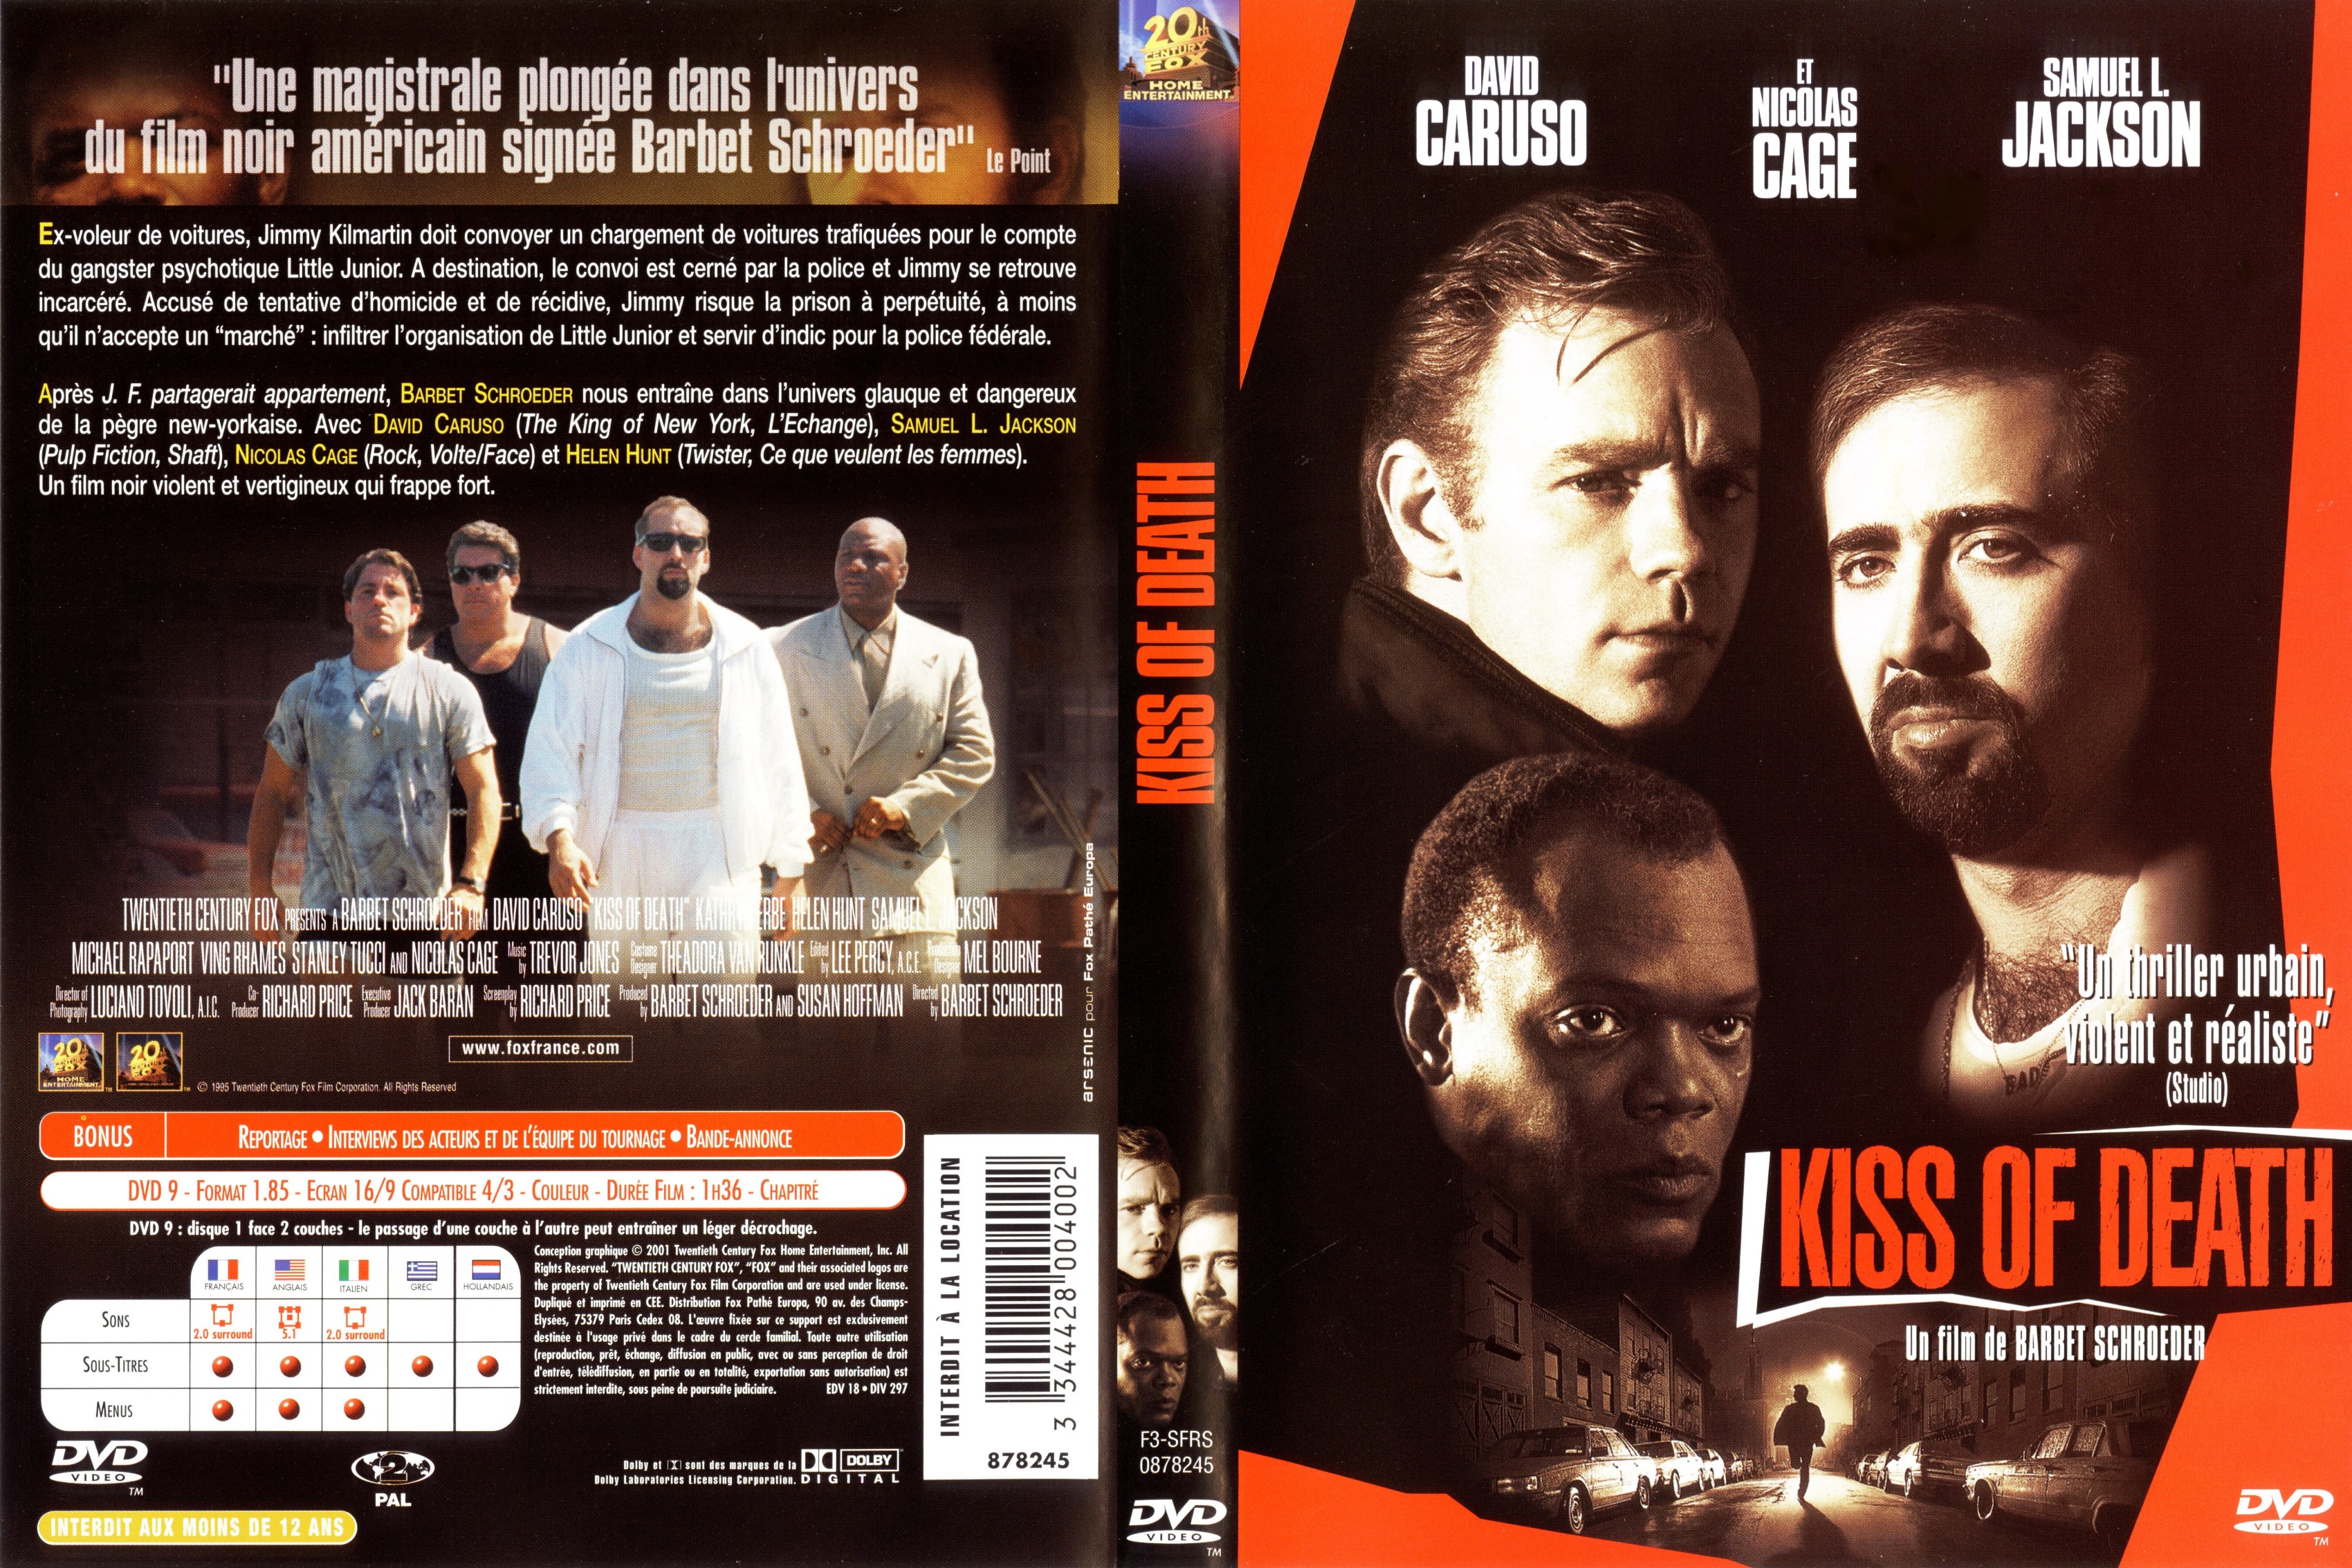 Jaquette DVD Kiss of death